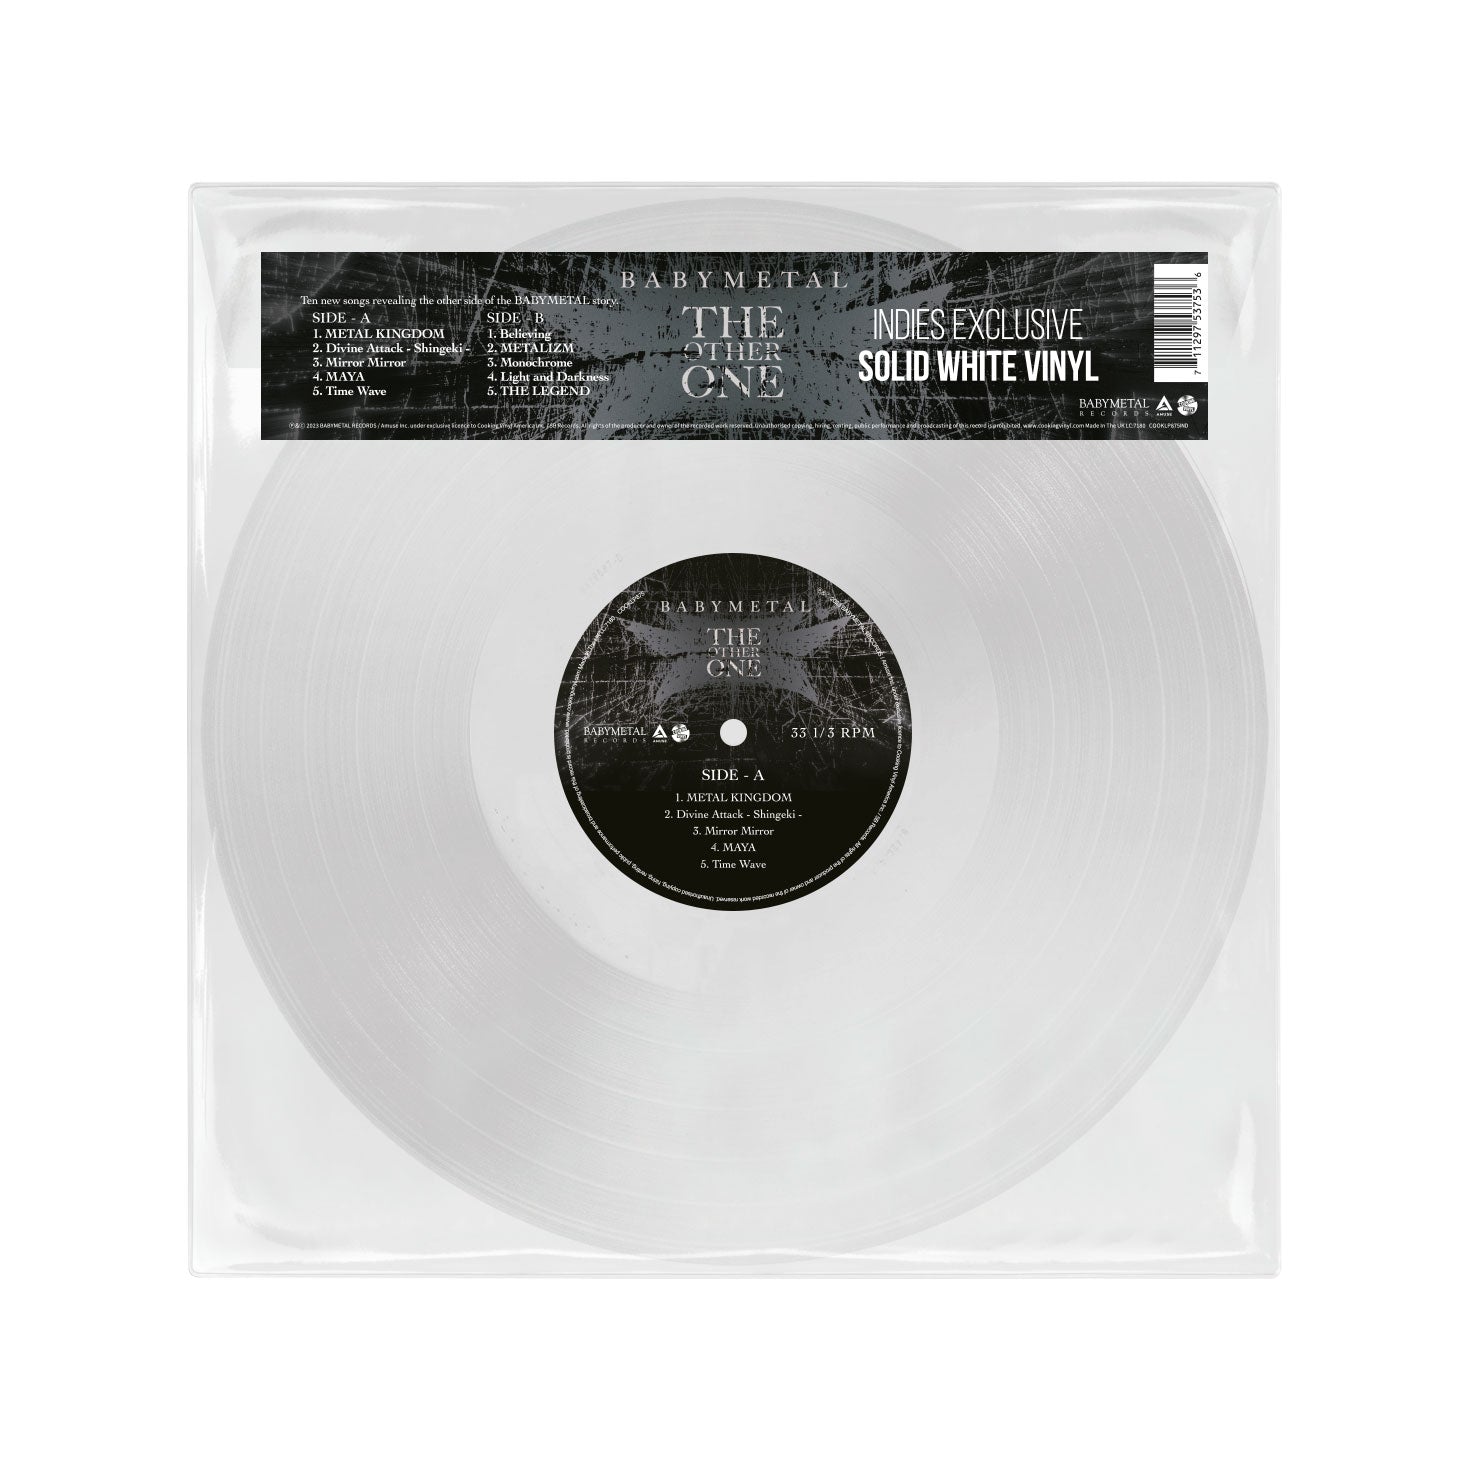 Babymetal - The Other One [Indie-Exclusive White Vinyl]